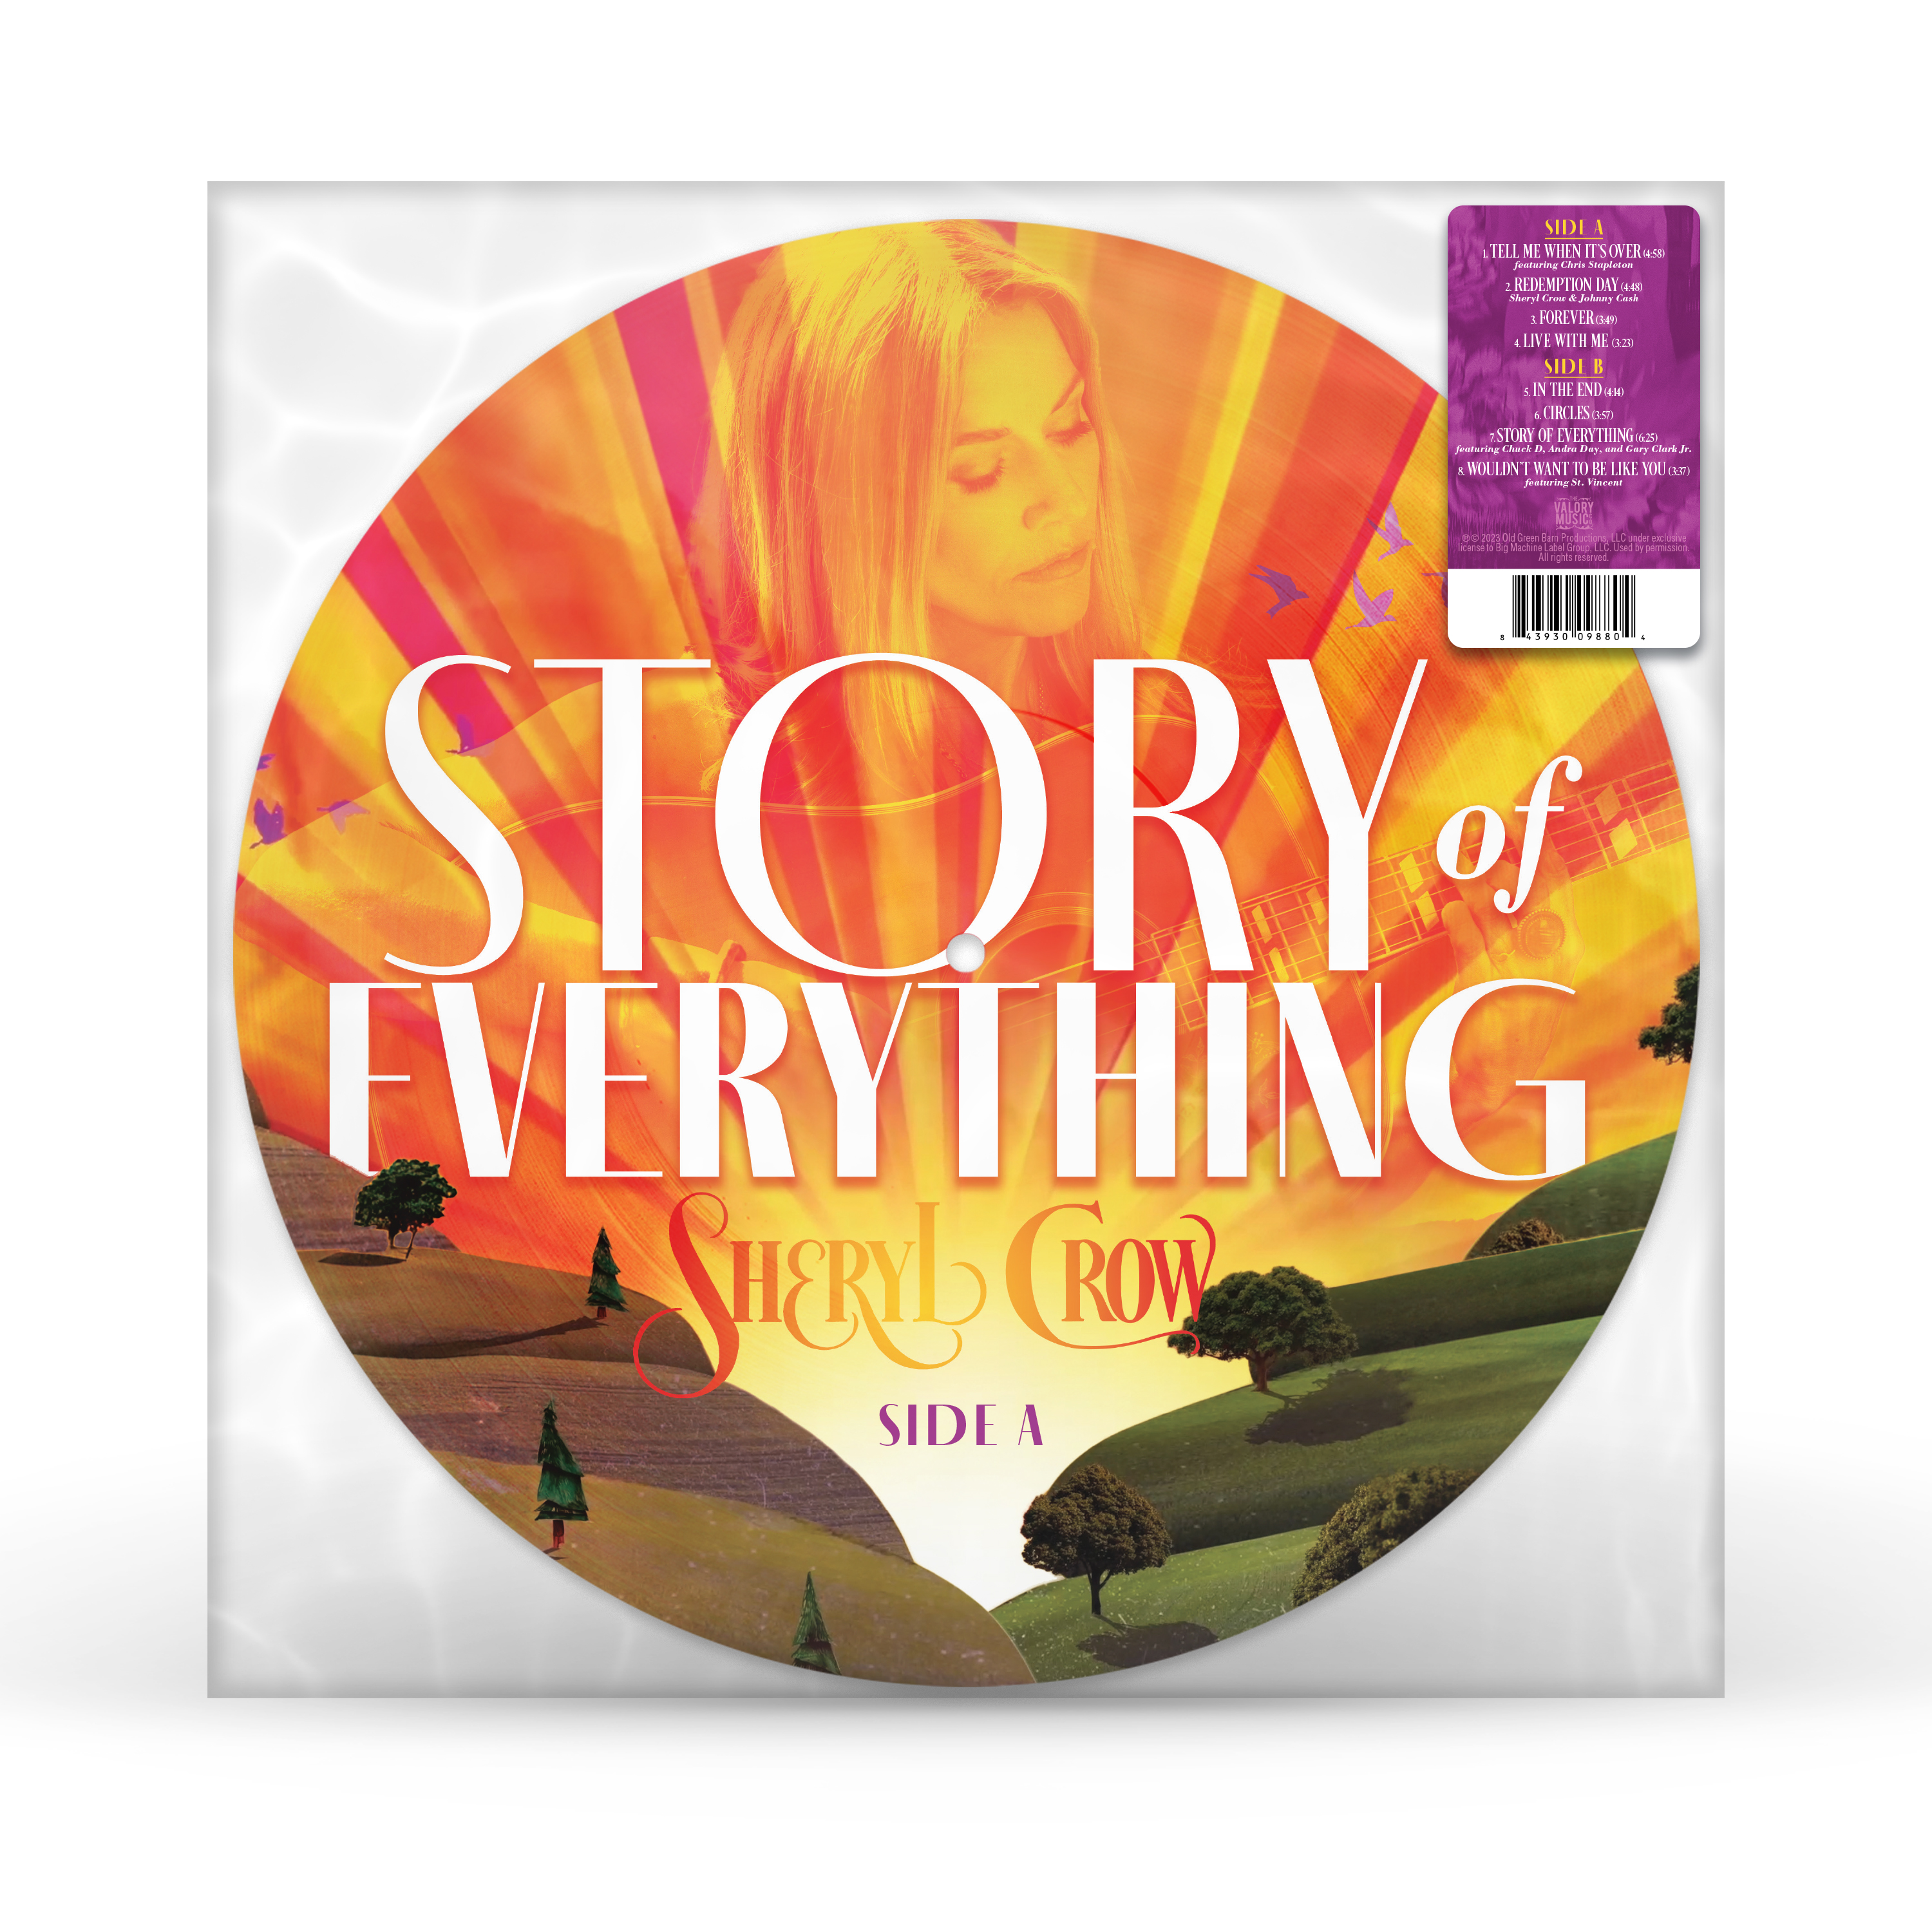 CD Shop - CROW SHERYL STORY OF EVERYTHING